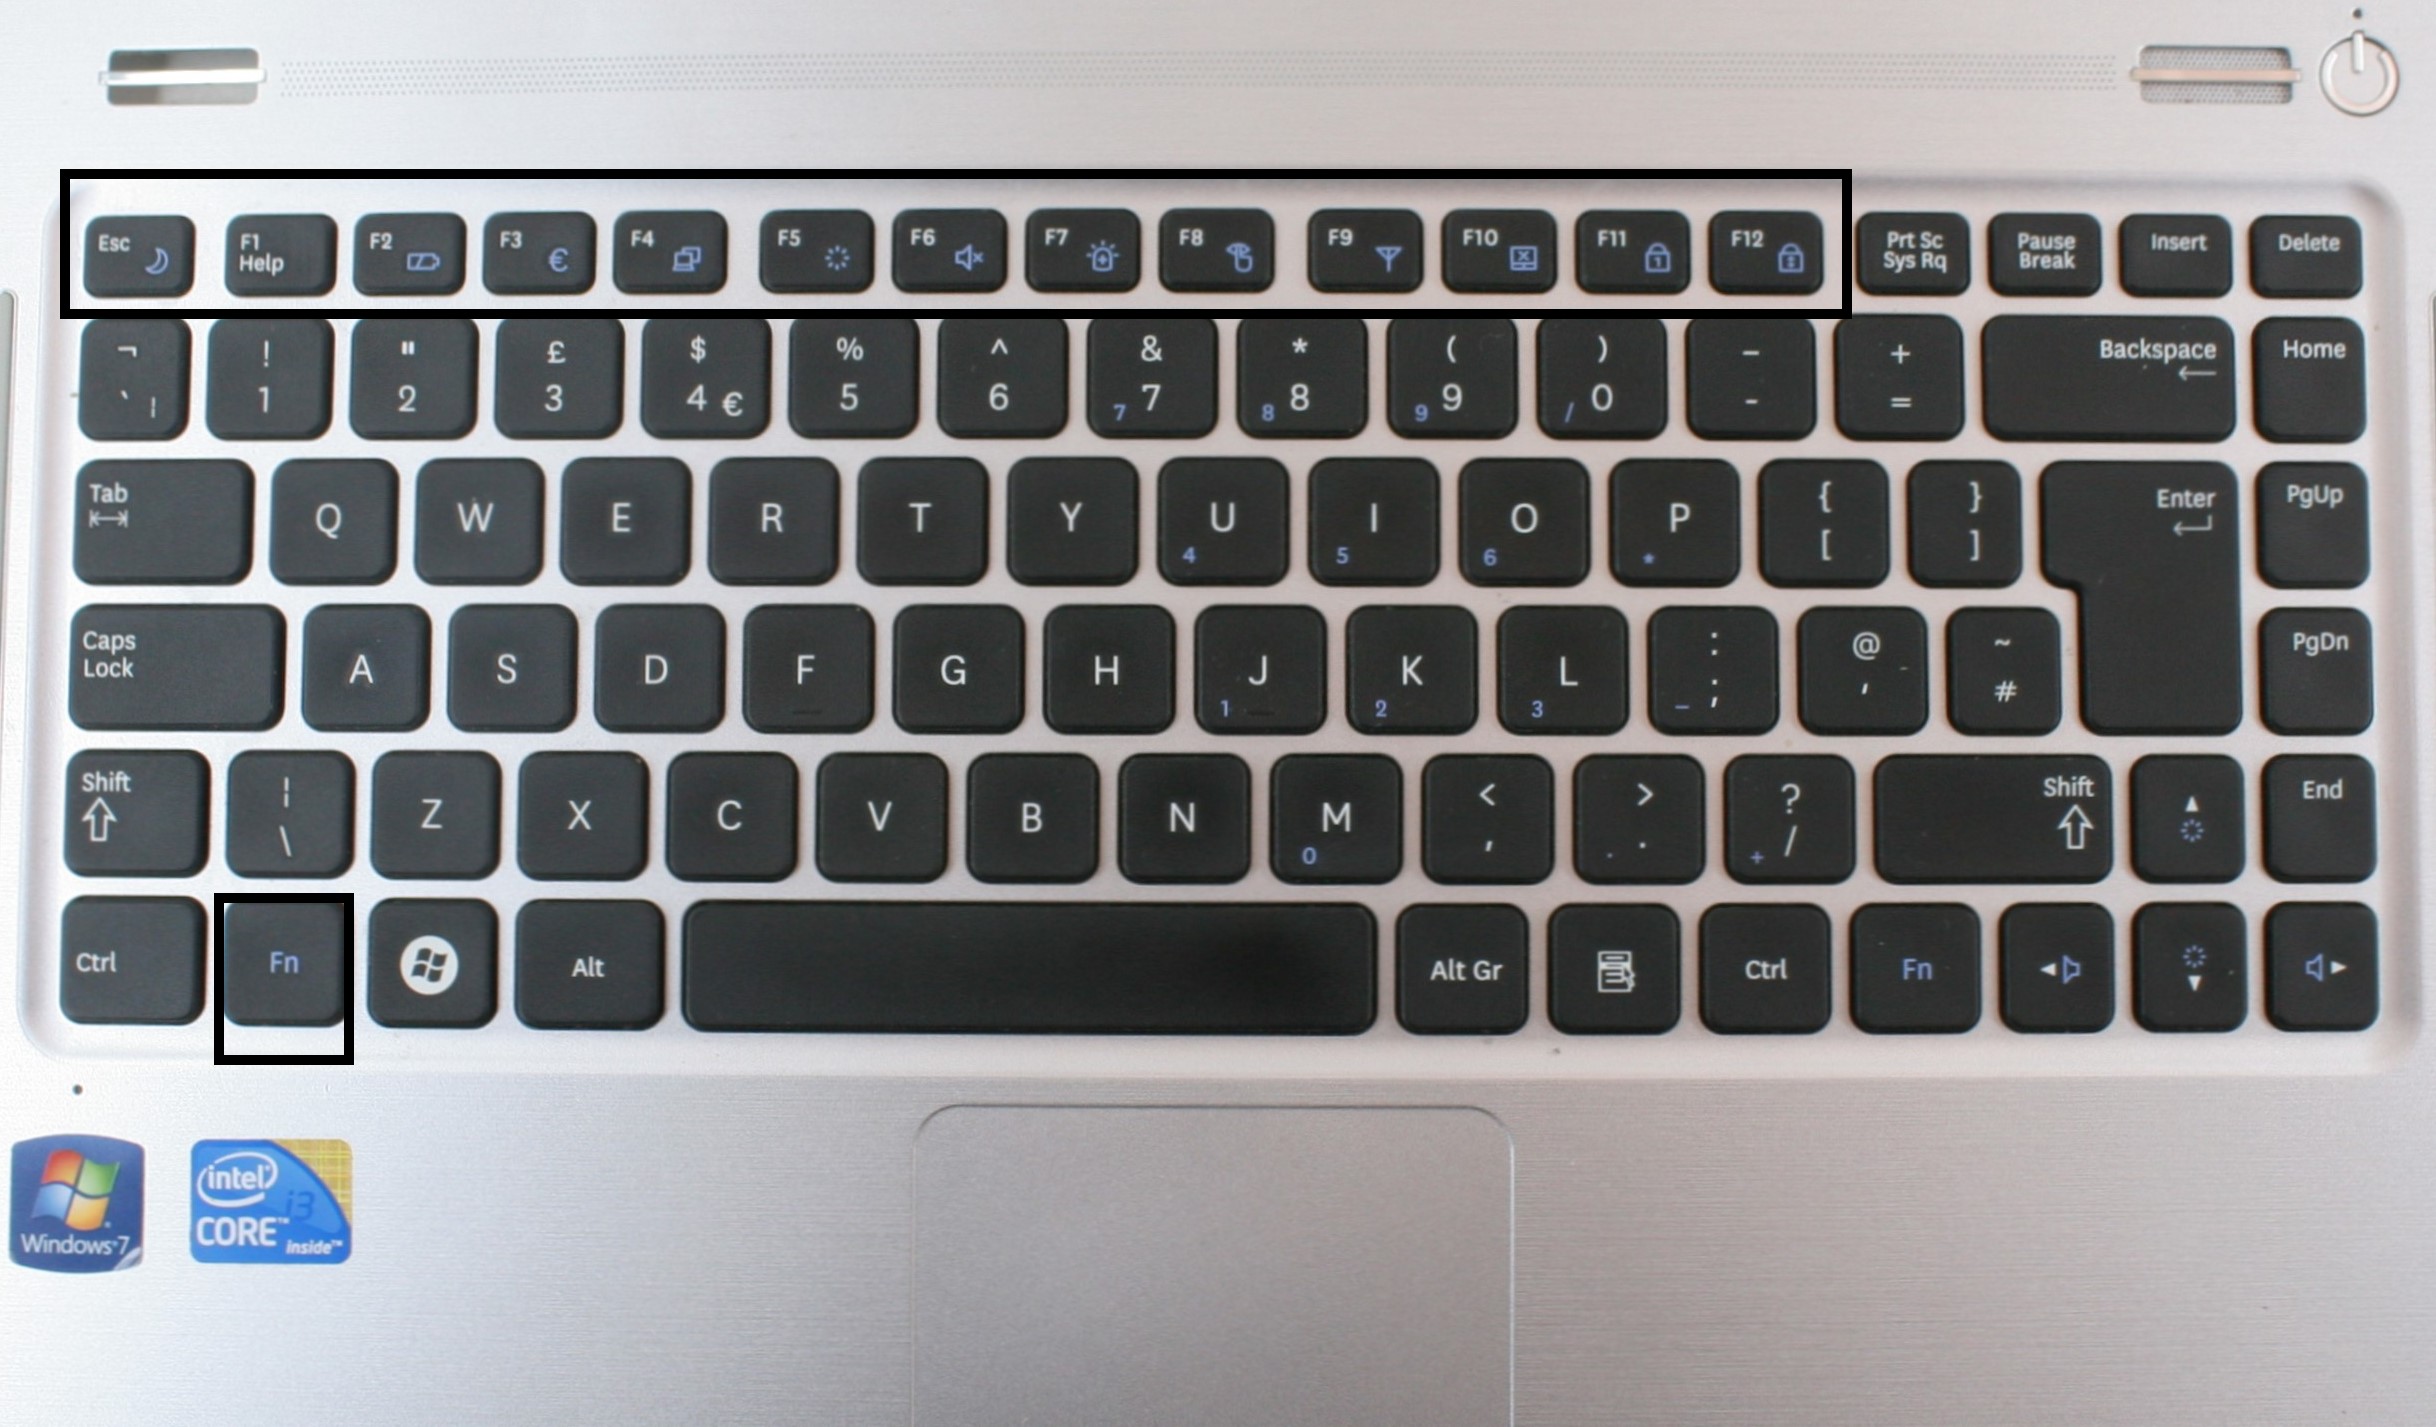 Function keys and Fn key mentioned on the keyboard 